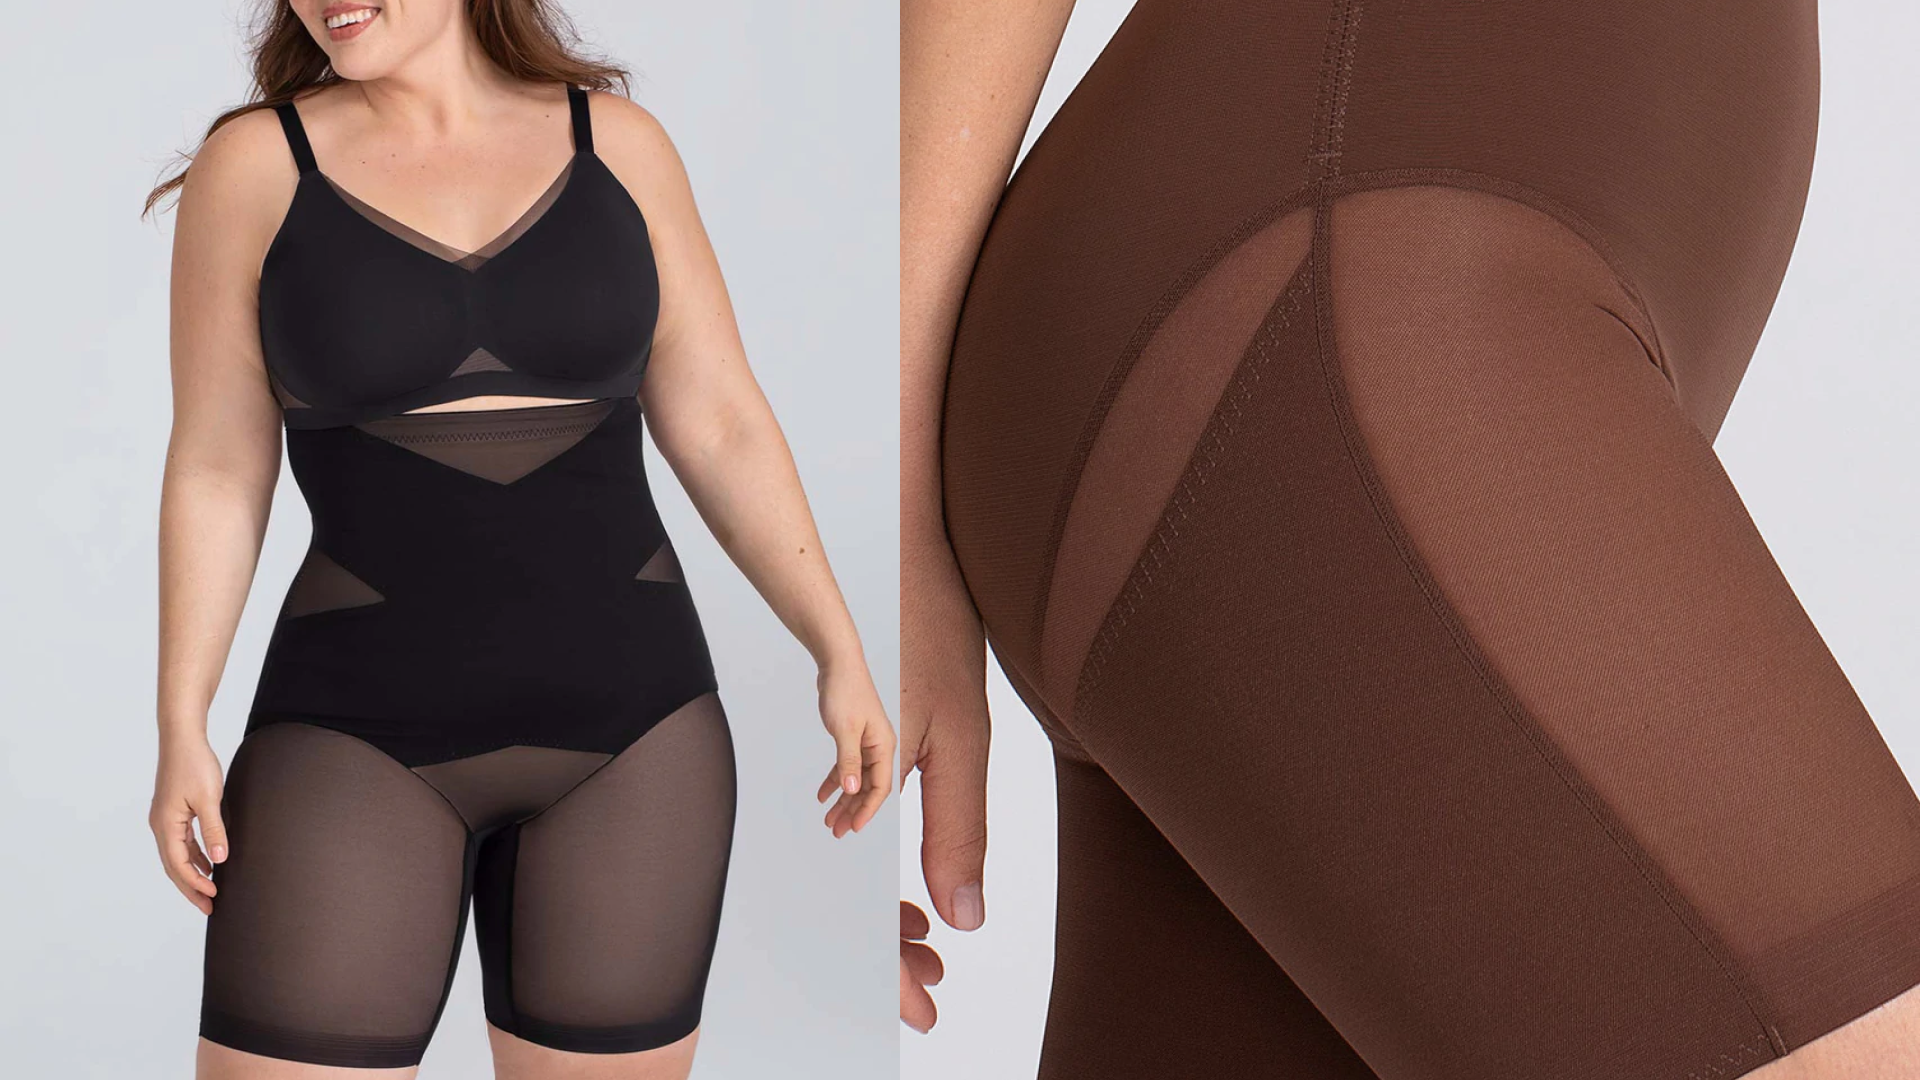 Sick of shapewear? Time to slip into the Comfort Smoothing